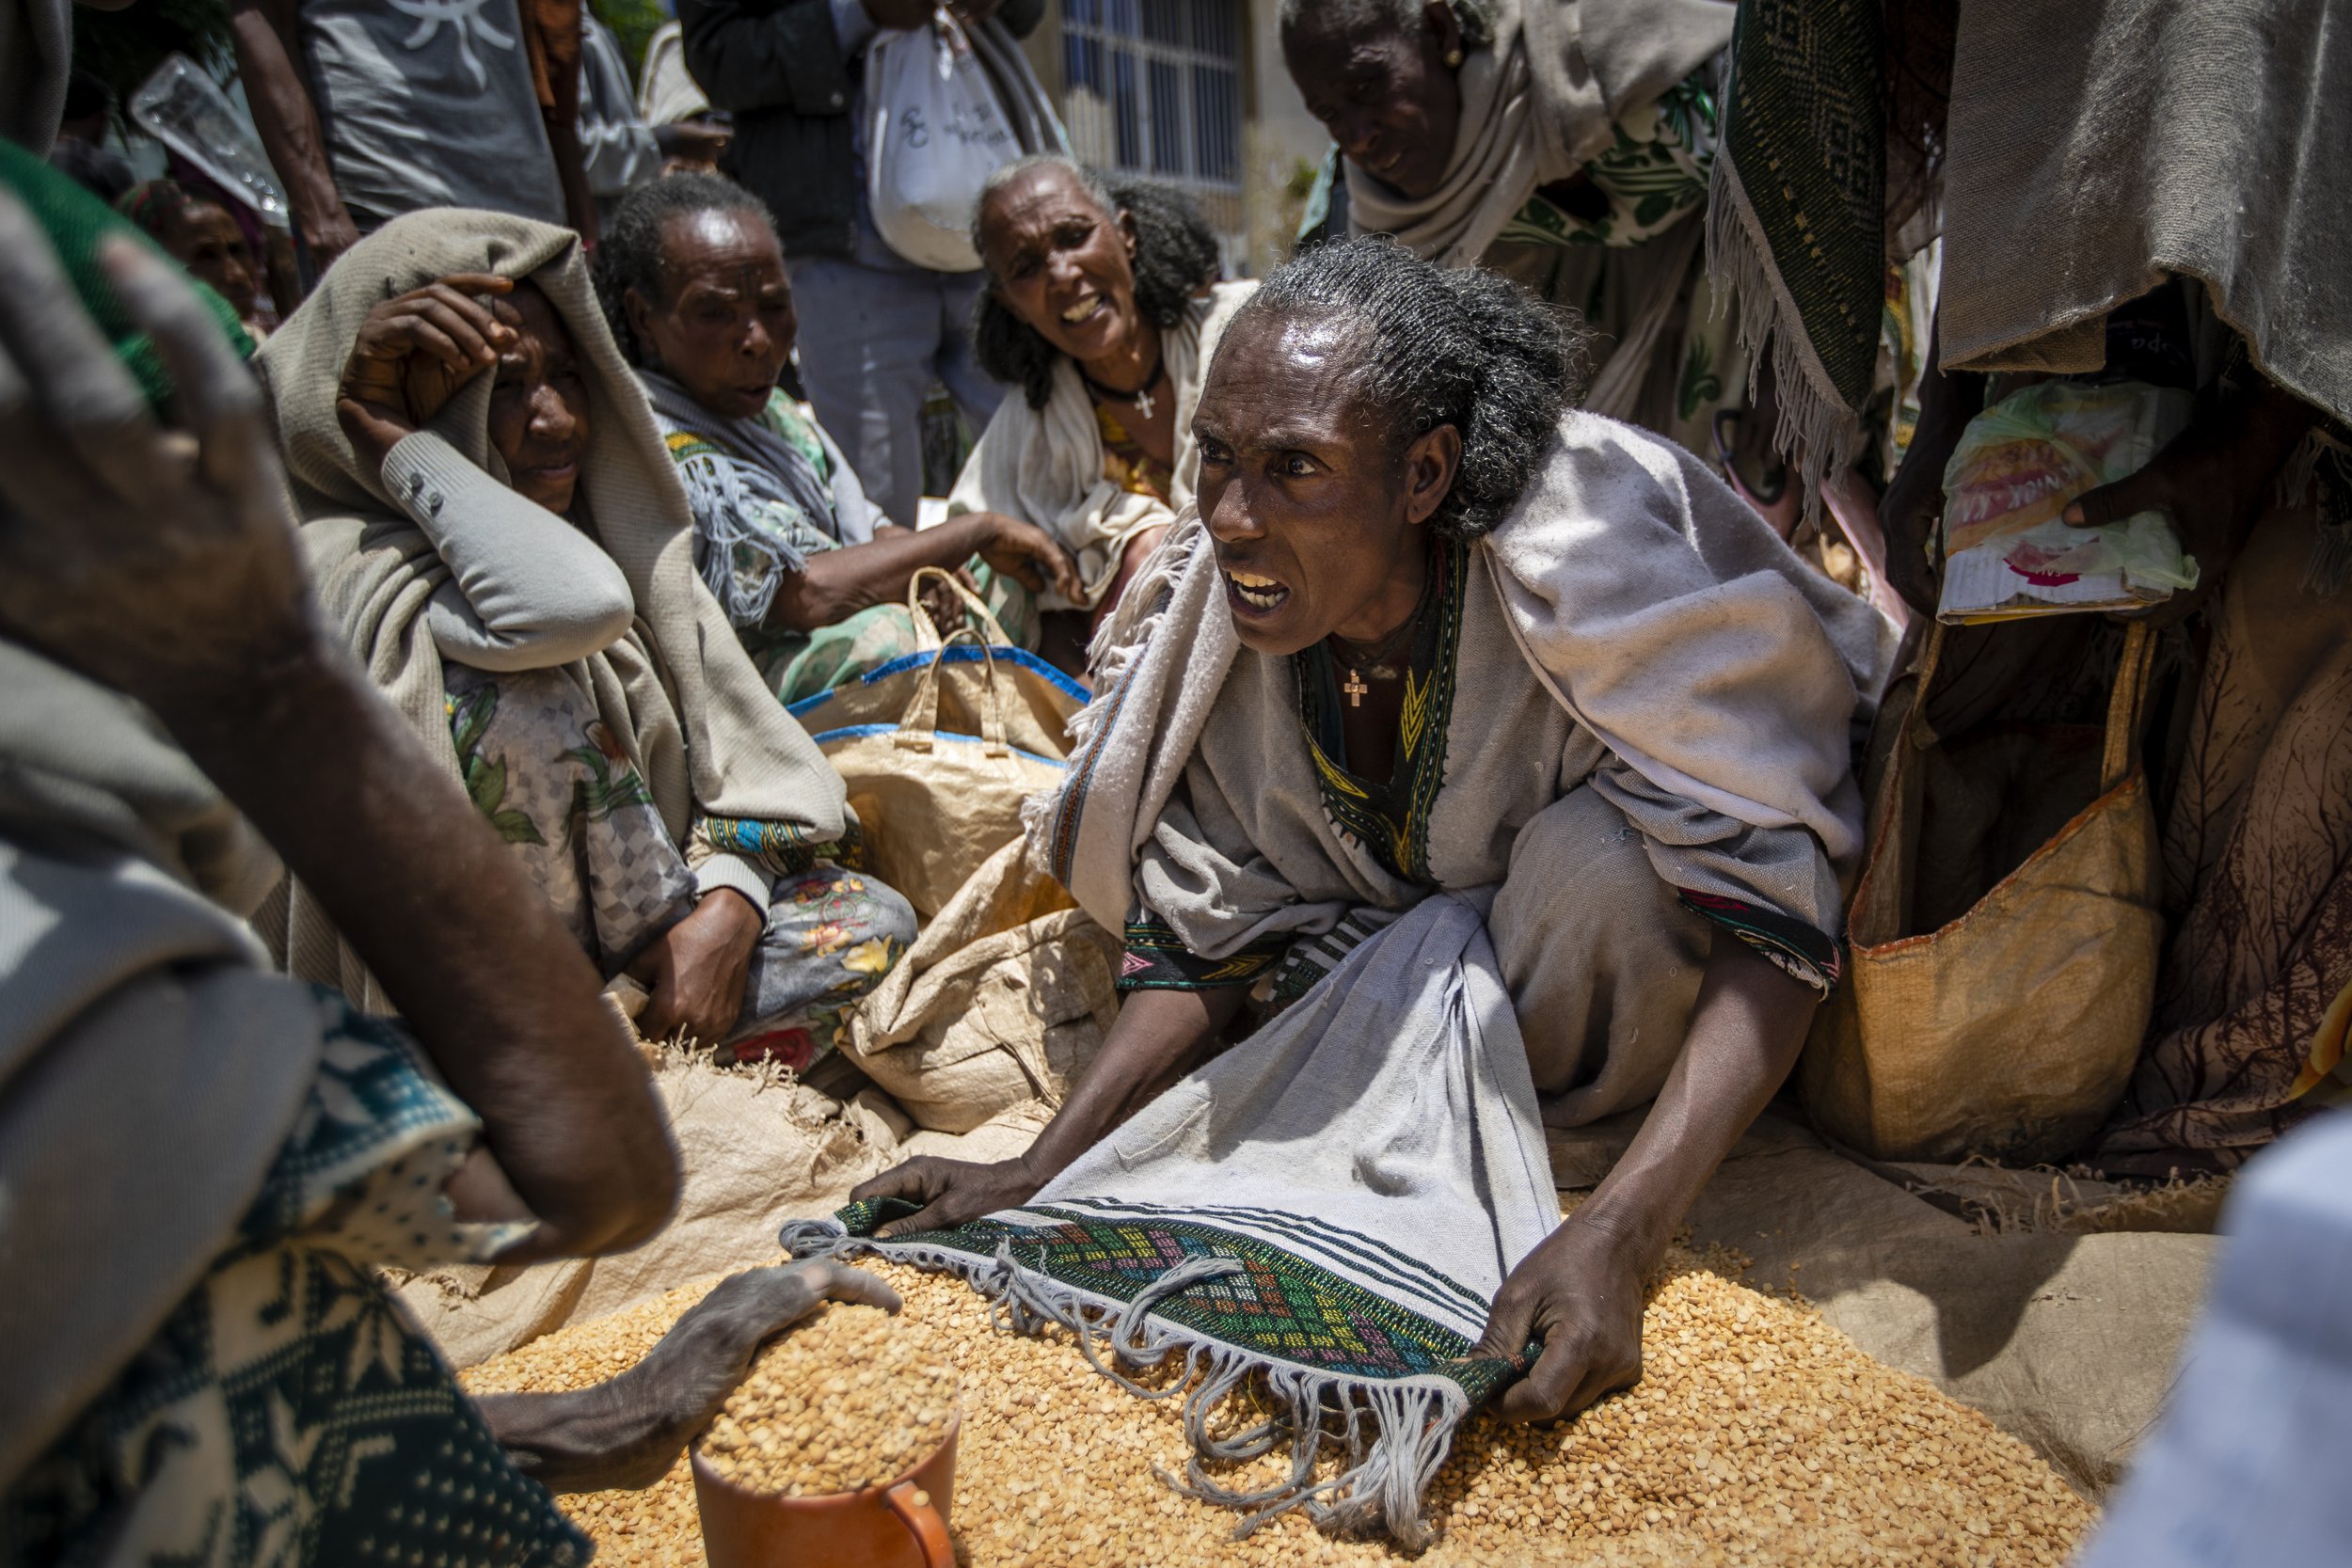  An Ethiopian woman argues with others over the allocation of yellow split peas distributed by the Relief Society of Tigray in the town of Agula, in the Tigray region of northern Ethiopia, on May 8, 2021. In war-torn Tigray, it is not just that peopl